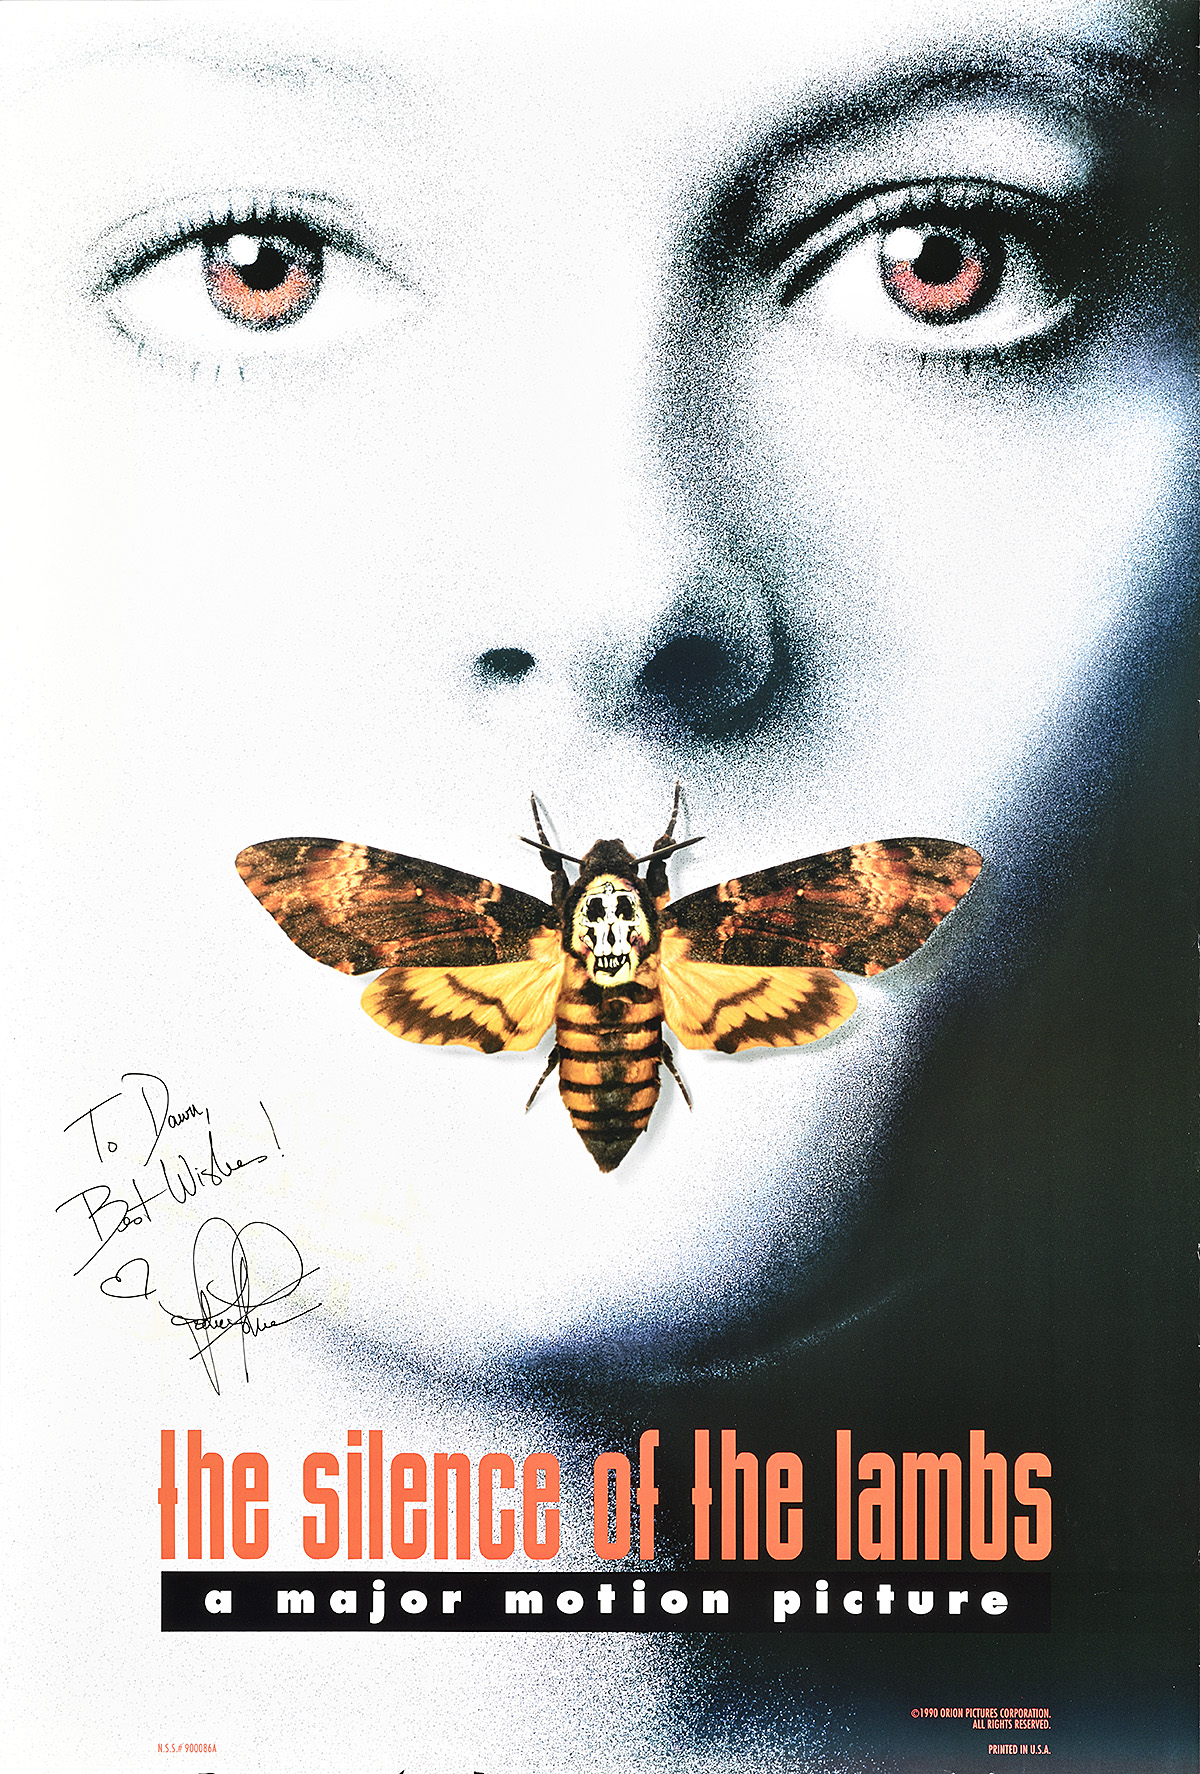 A signed poster of an overexposed white woman's face with orange eyes and a moth over her mouth.